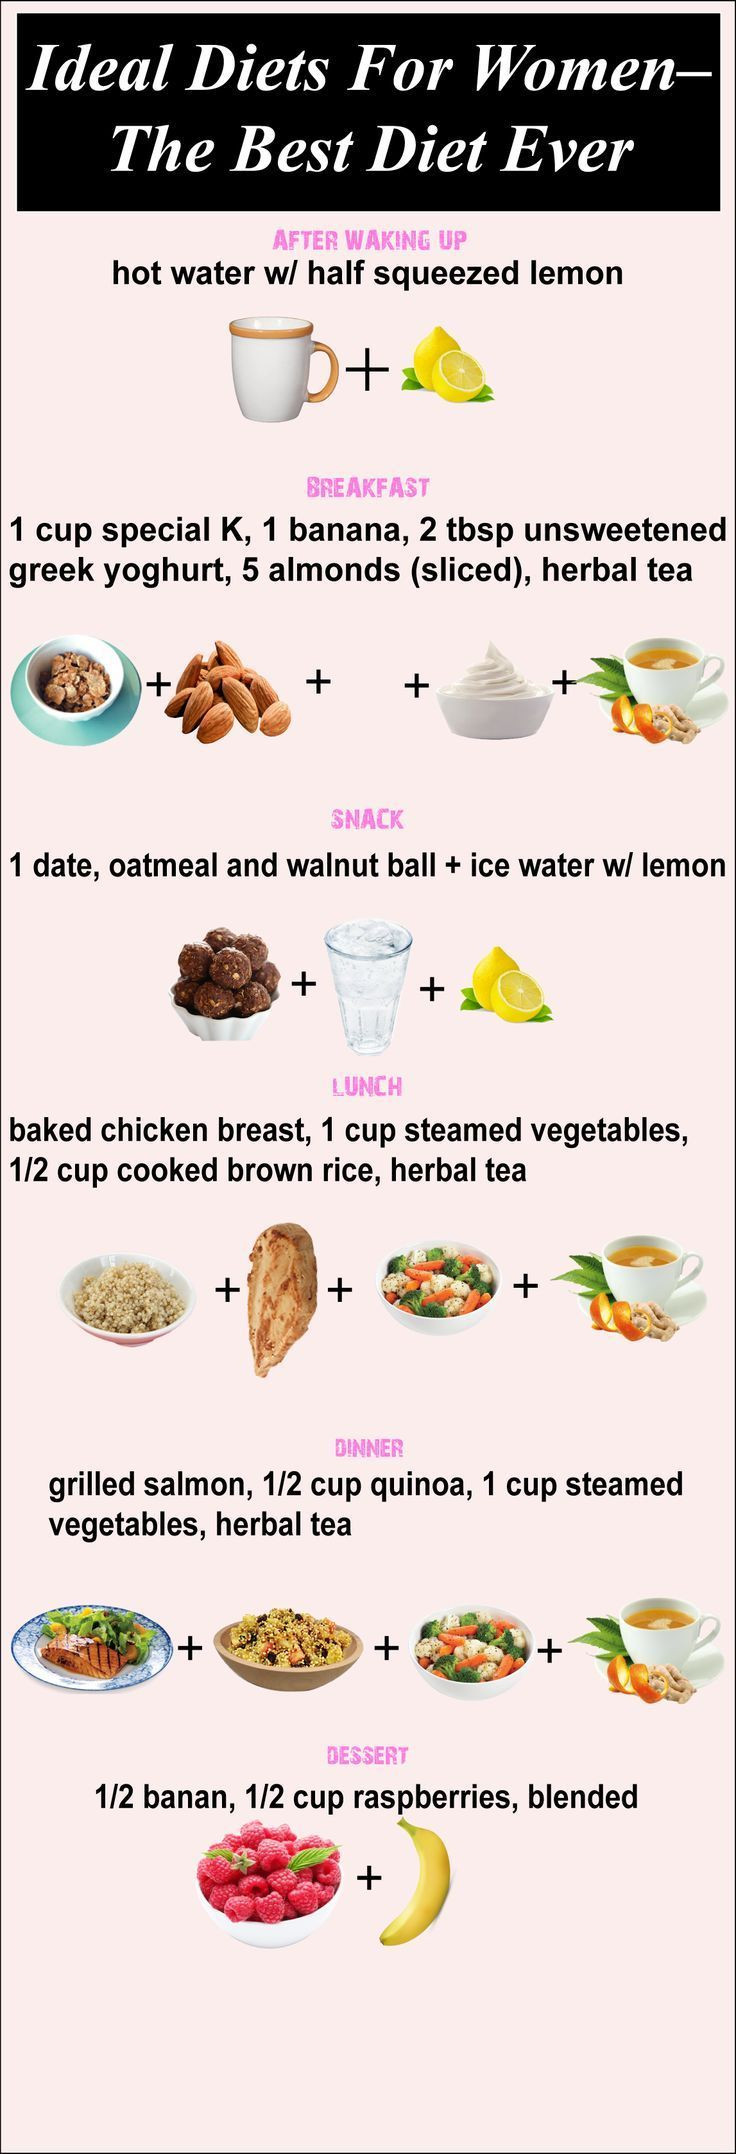 Weight Loss Meal Plans For Women Vegetarian
 Food Plans Weight Loss Illustration Description When a